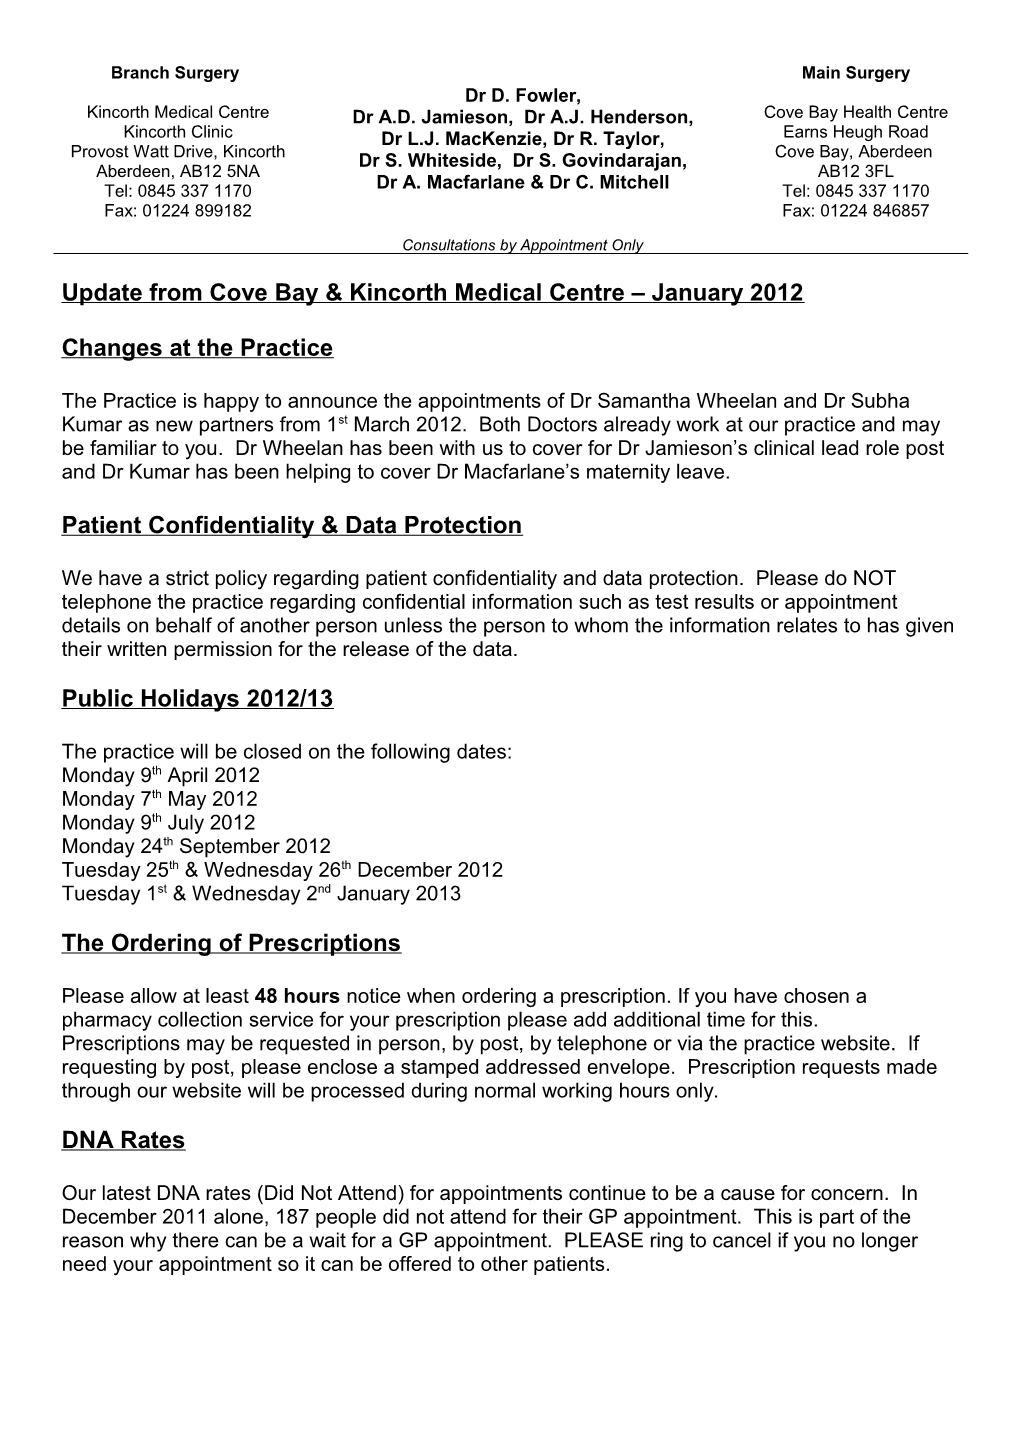 Update from Cove Bay & Kincorth Medical Centre January 2012